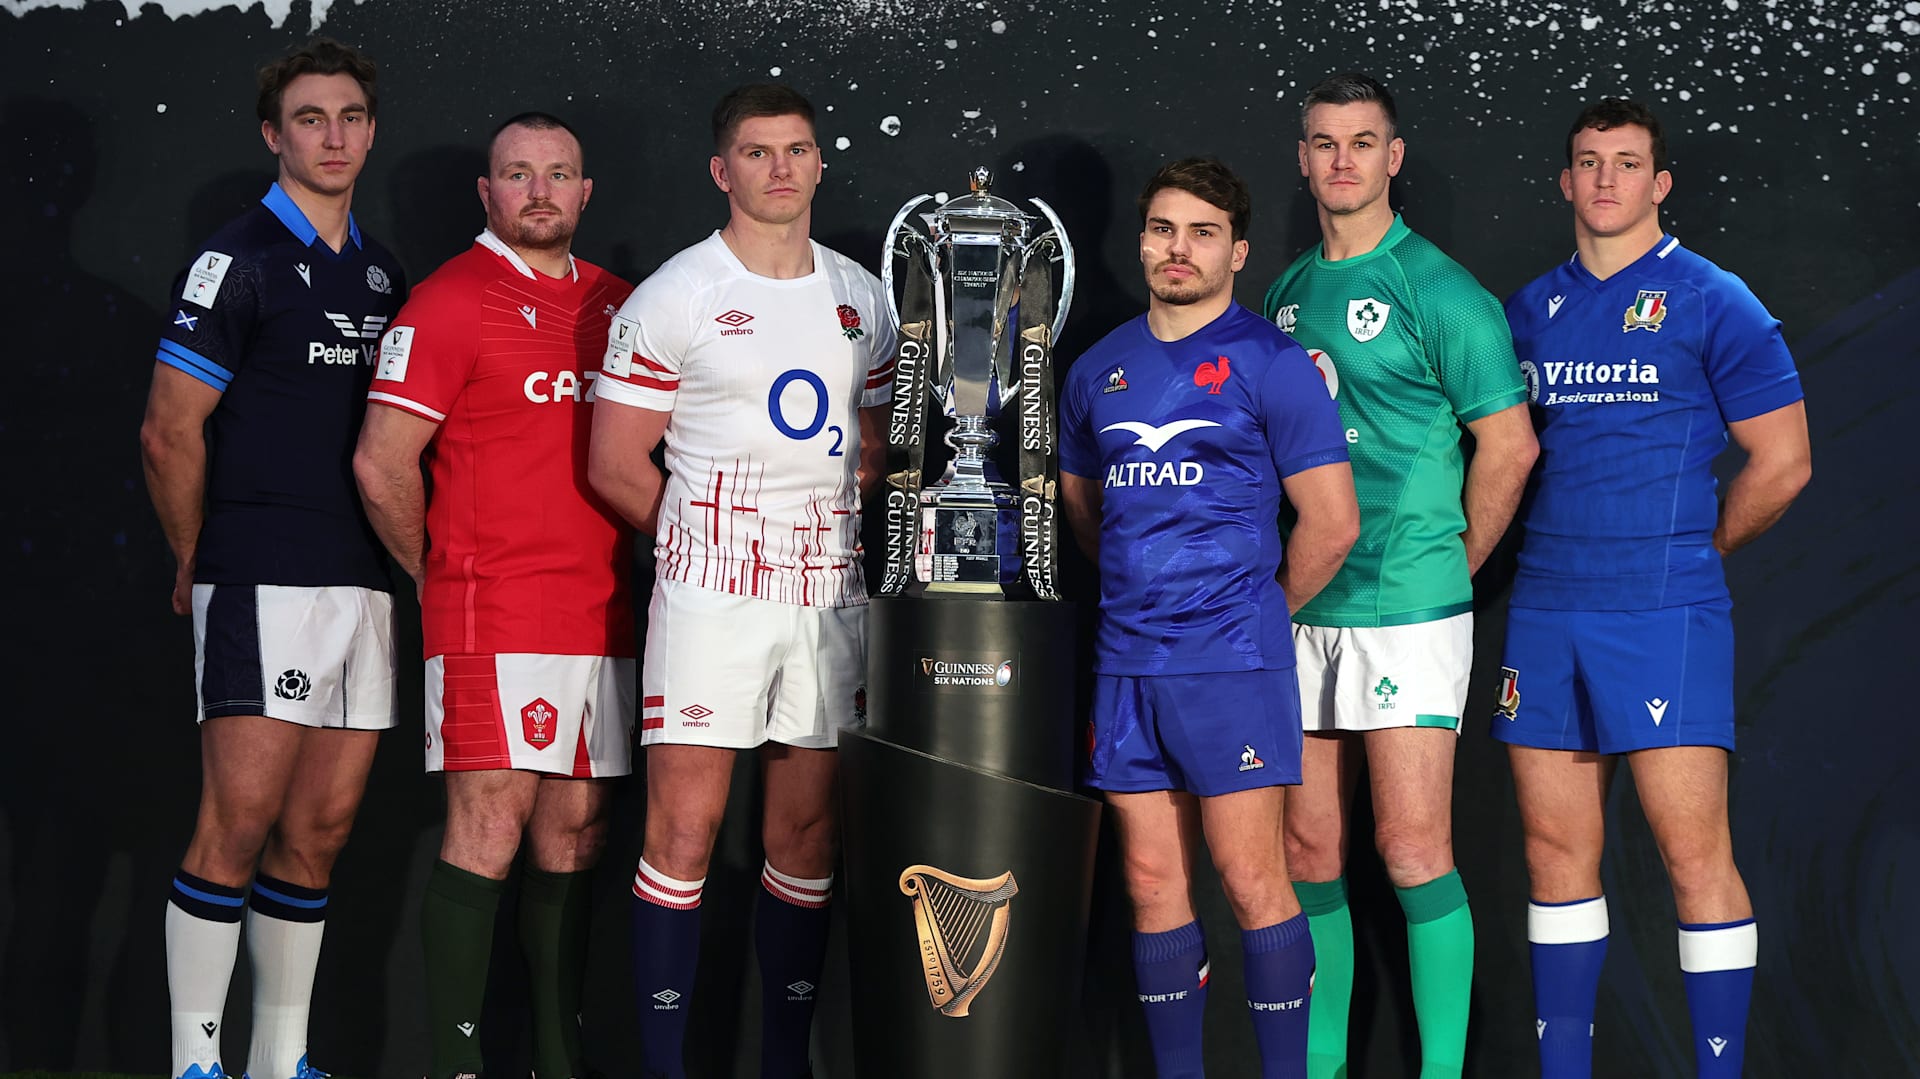 6 nations rugby 2022 tv coverage